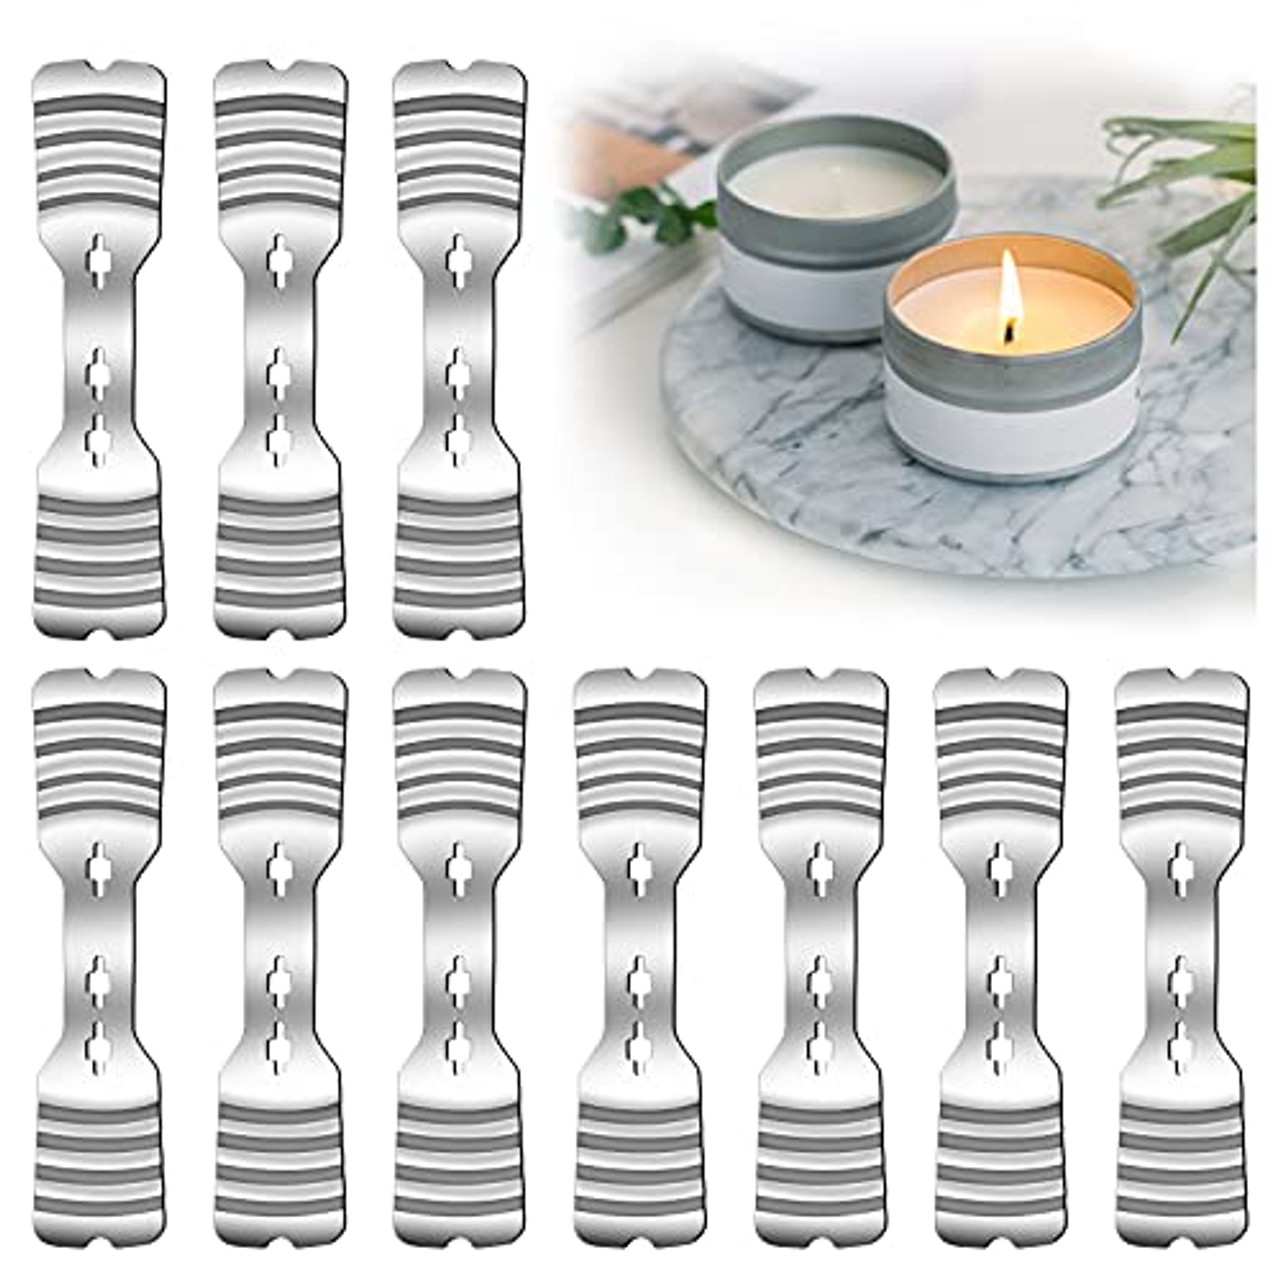 Wooden Candle Wick Holders,Candle Wicks Centering Device,Candle Wick Bars, Wick Holders for Candle Making